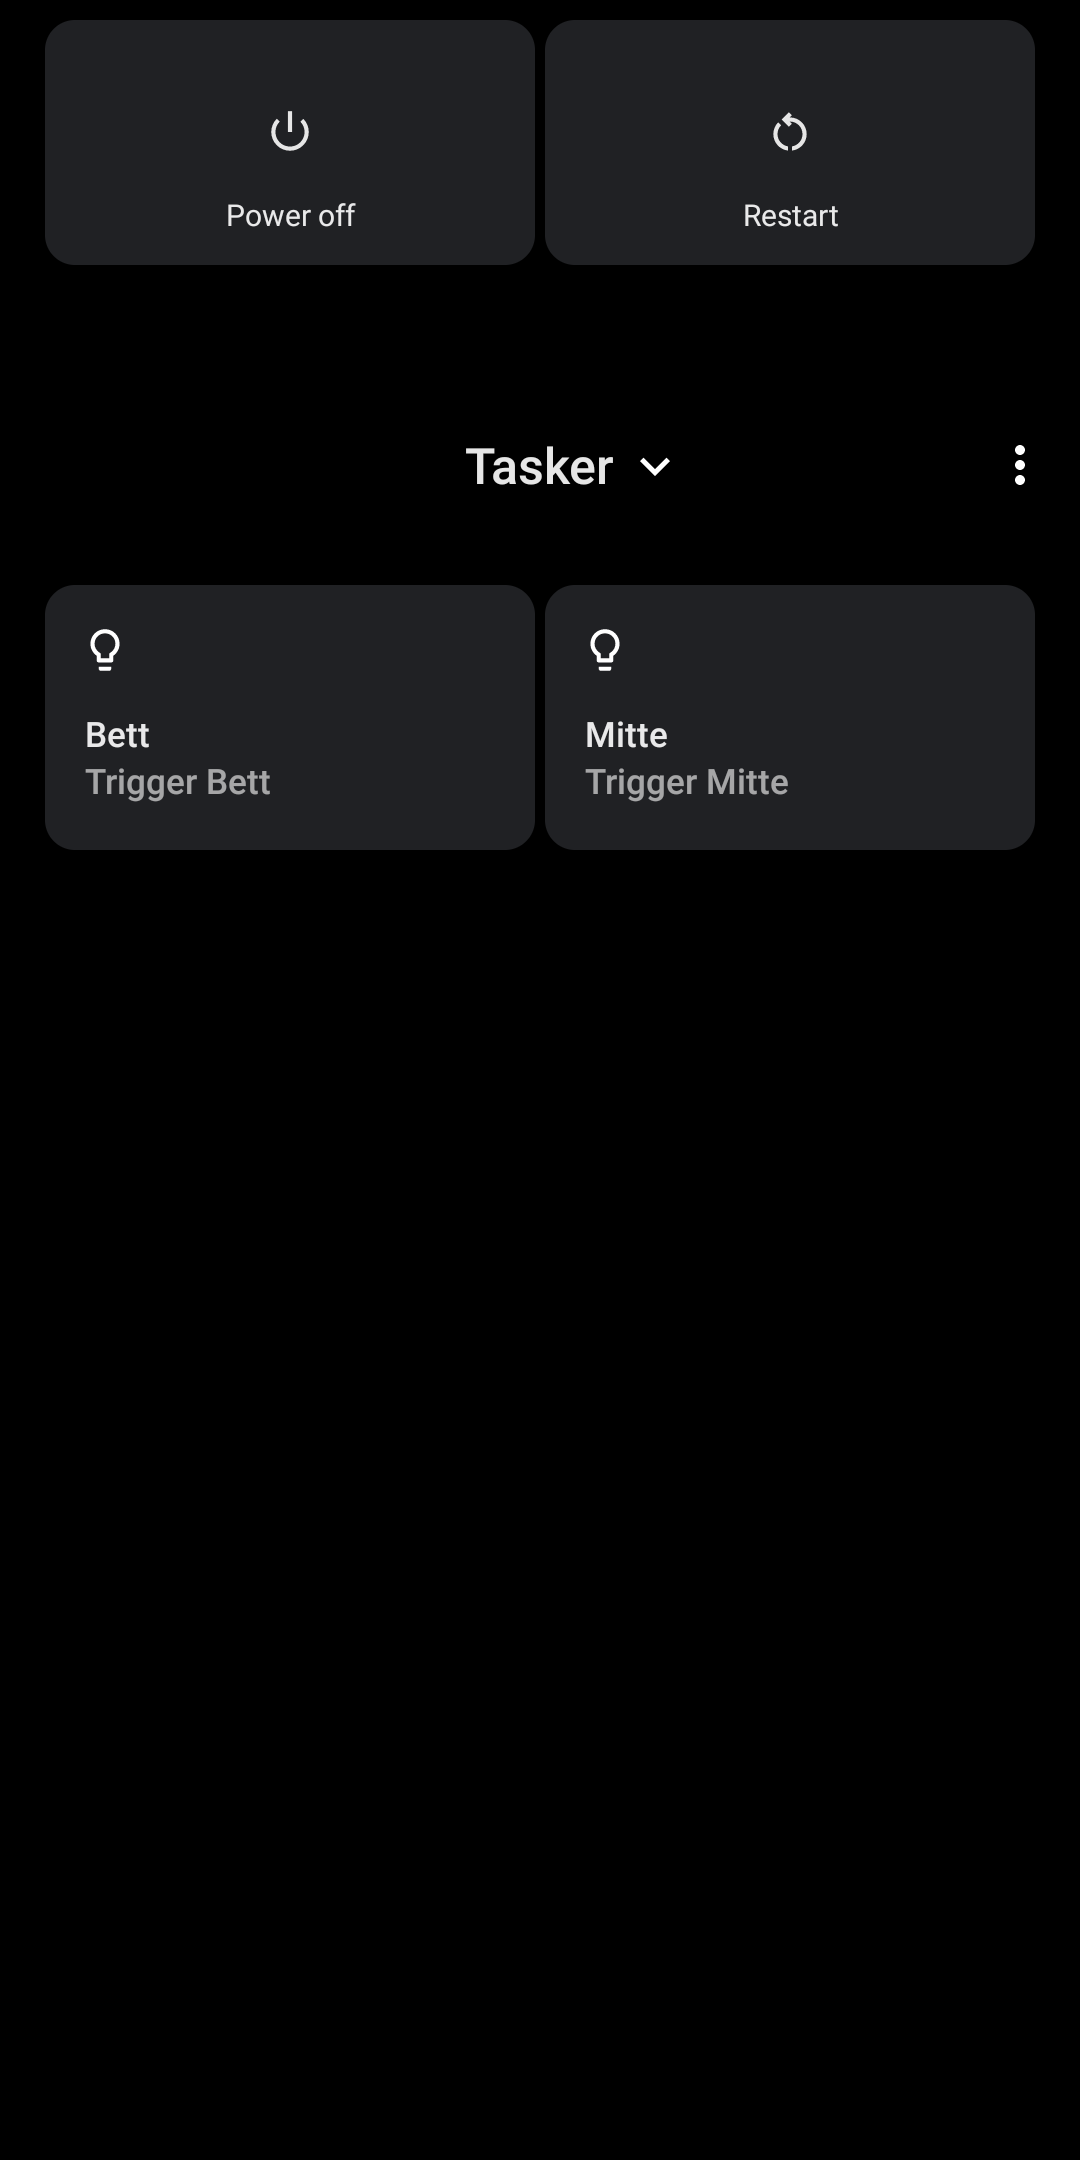 The Android 11 power menu shows light switch controls added using Tasker